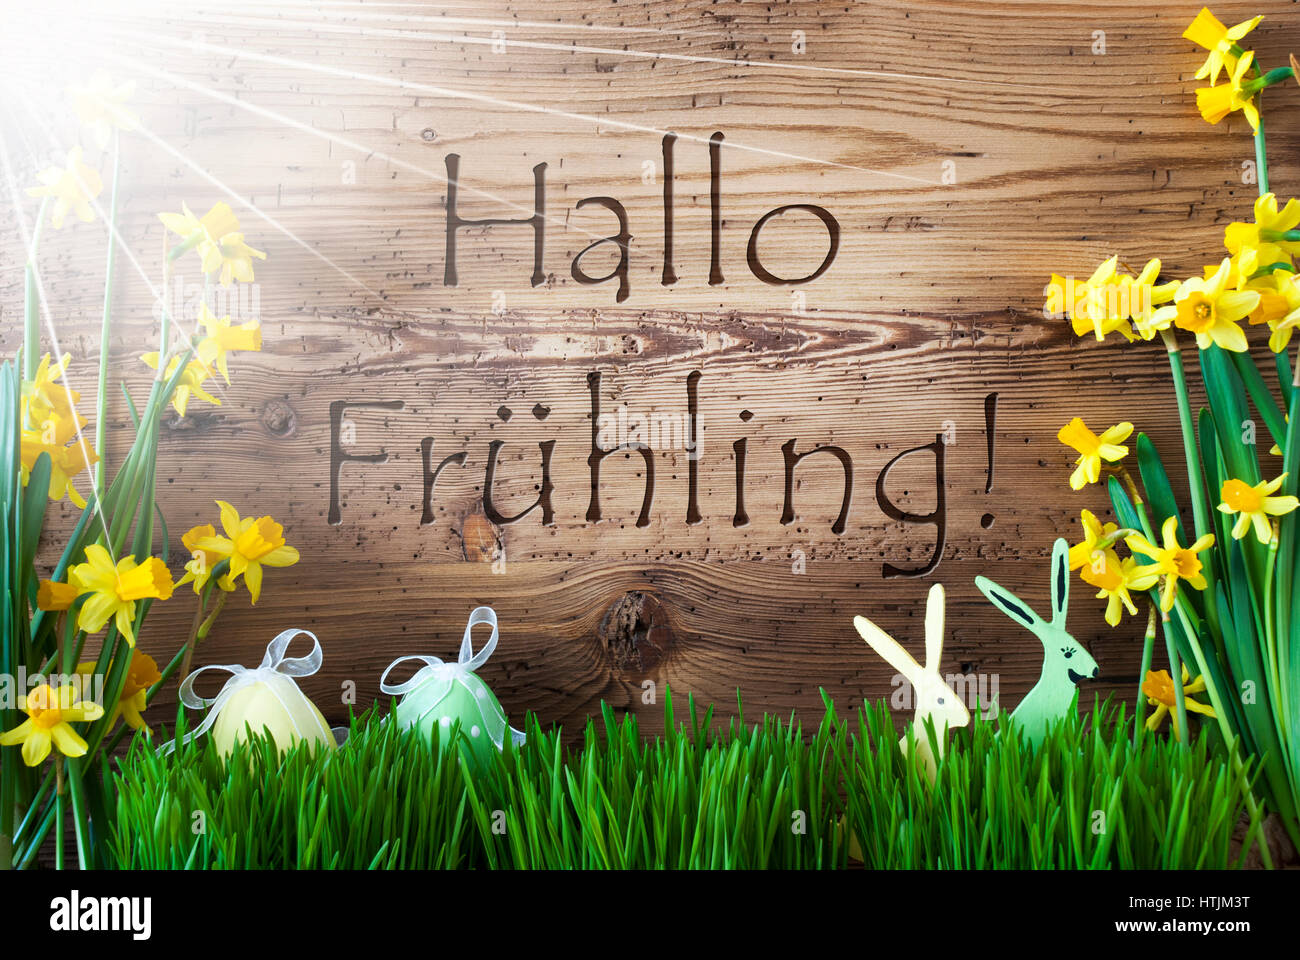 Wooden Background With German Text Hallo Fruehling Means Hello Spring. Easter Decoration Like Easter Eggs And Easter Bunny. Sunny Yellow Spring